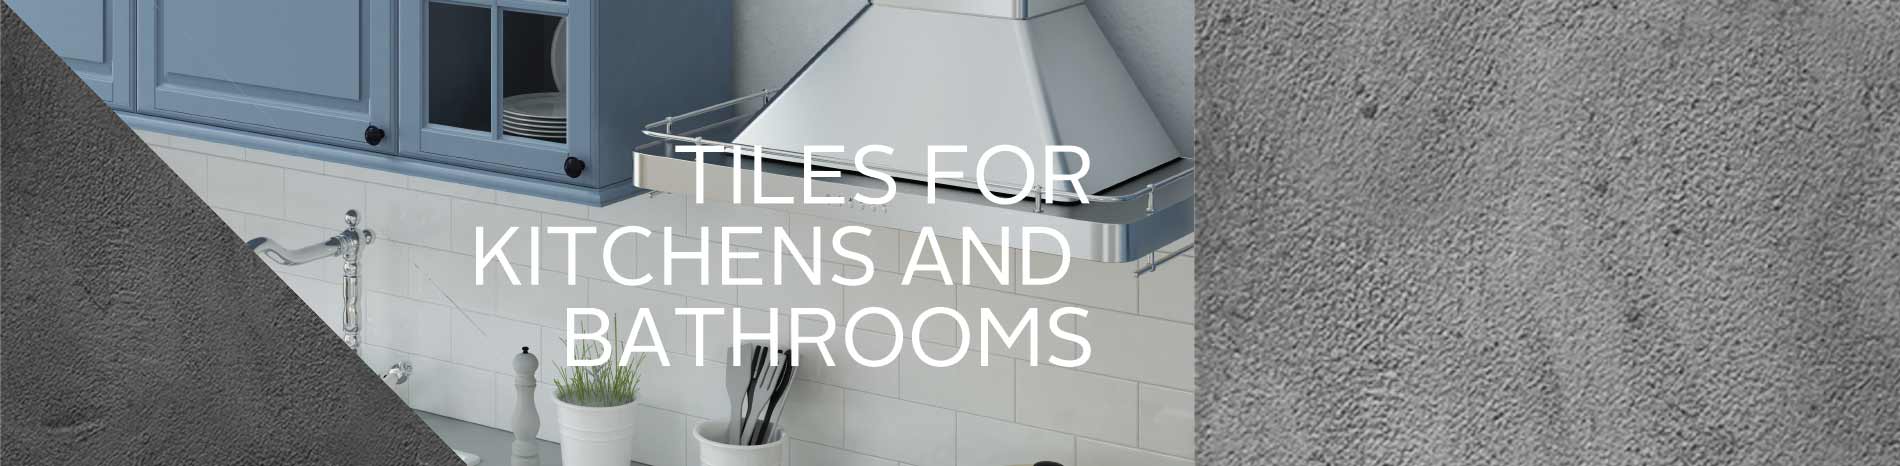 Kitchens-and-Bathrooms-Tiles-CTM